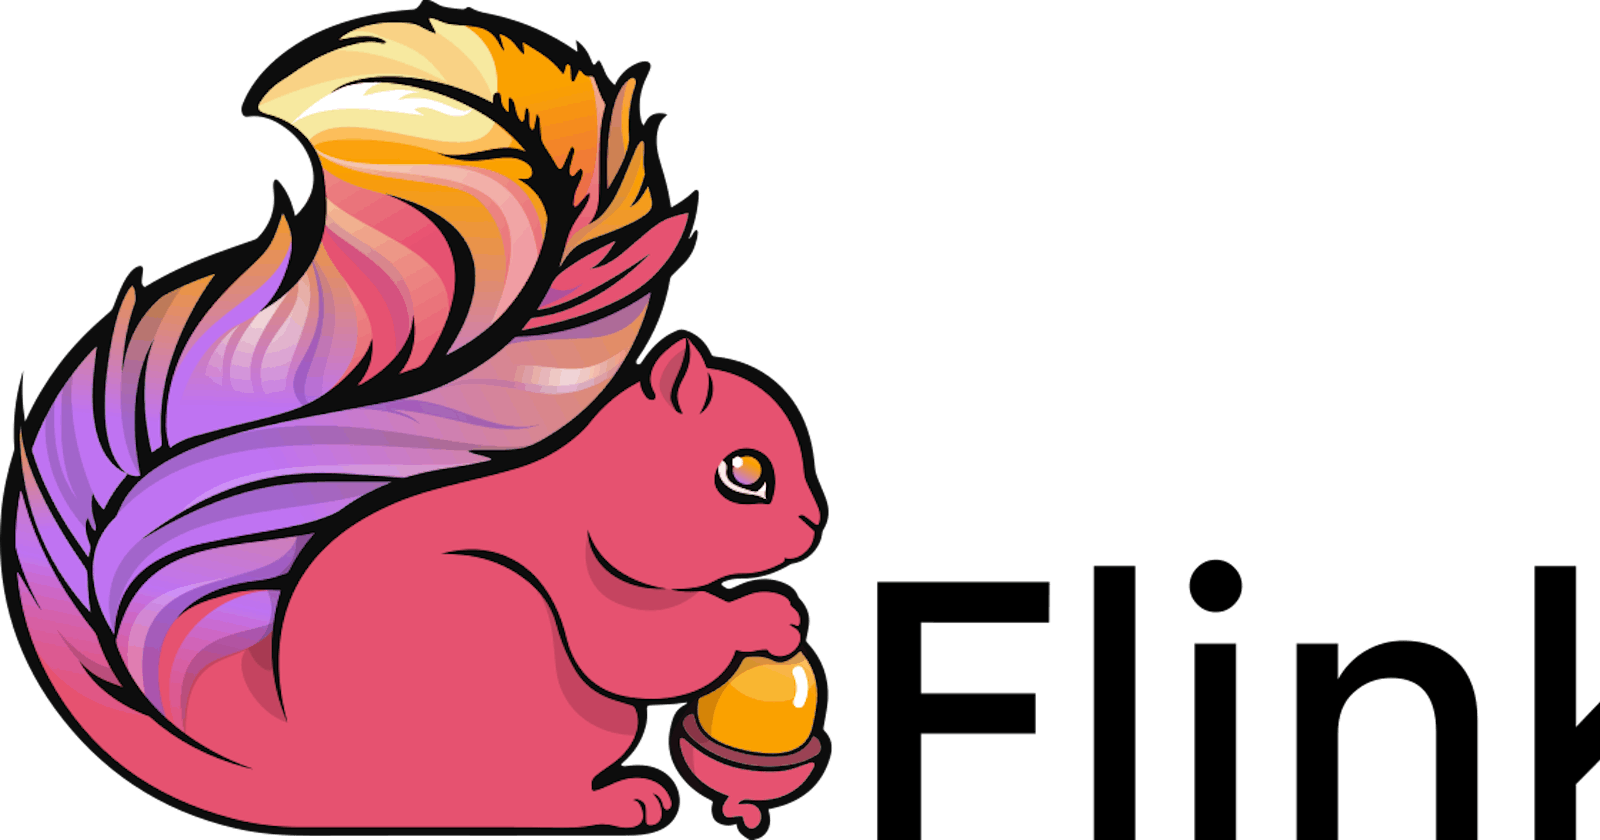 How to Get Started with Apache Flink for Effective Stream Processing